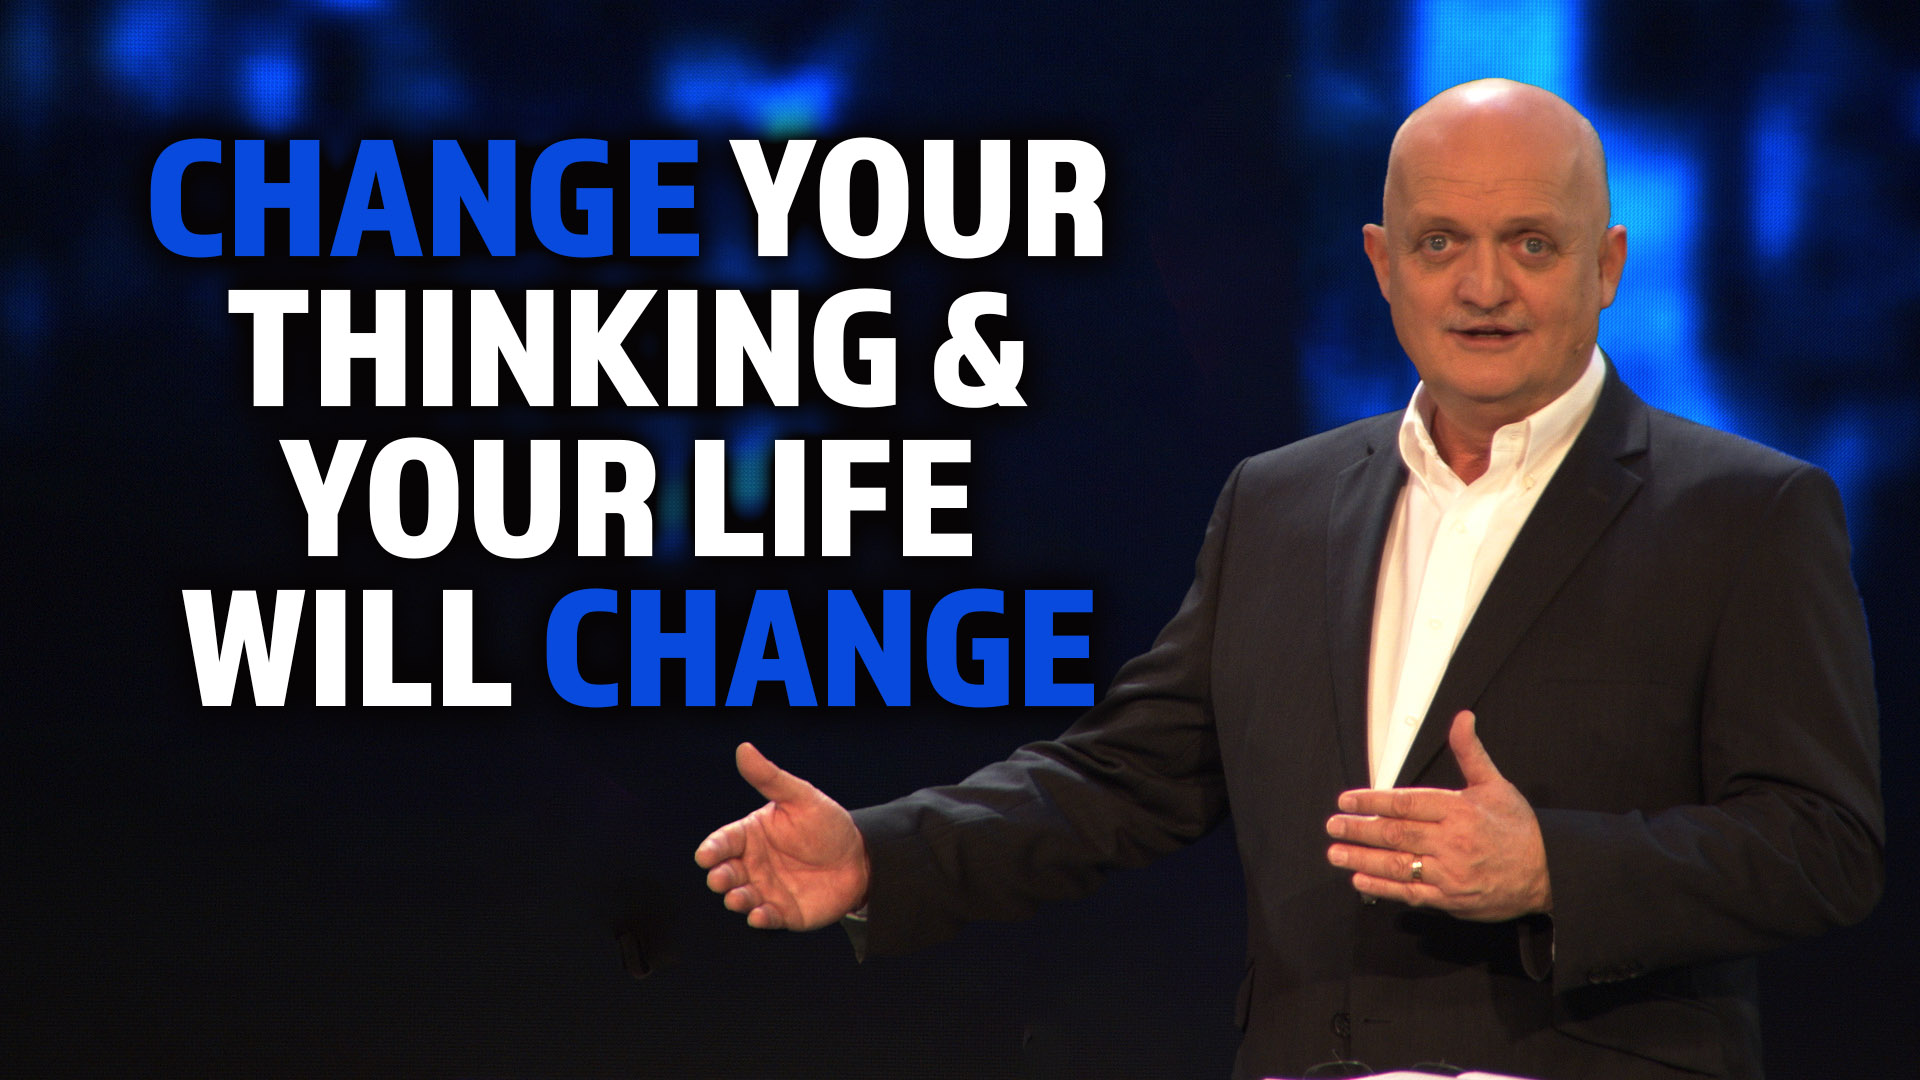 Change Your Thinking and Your Life Will Change